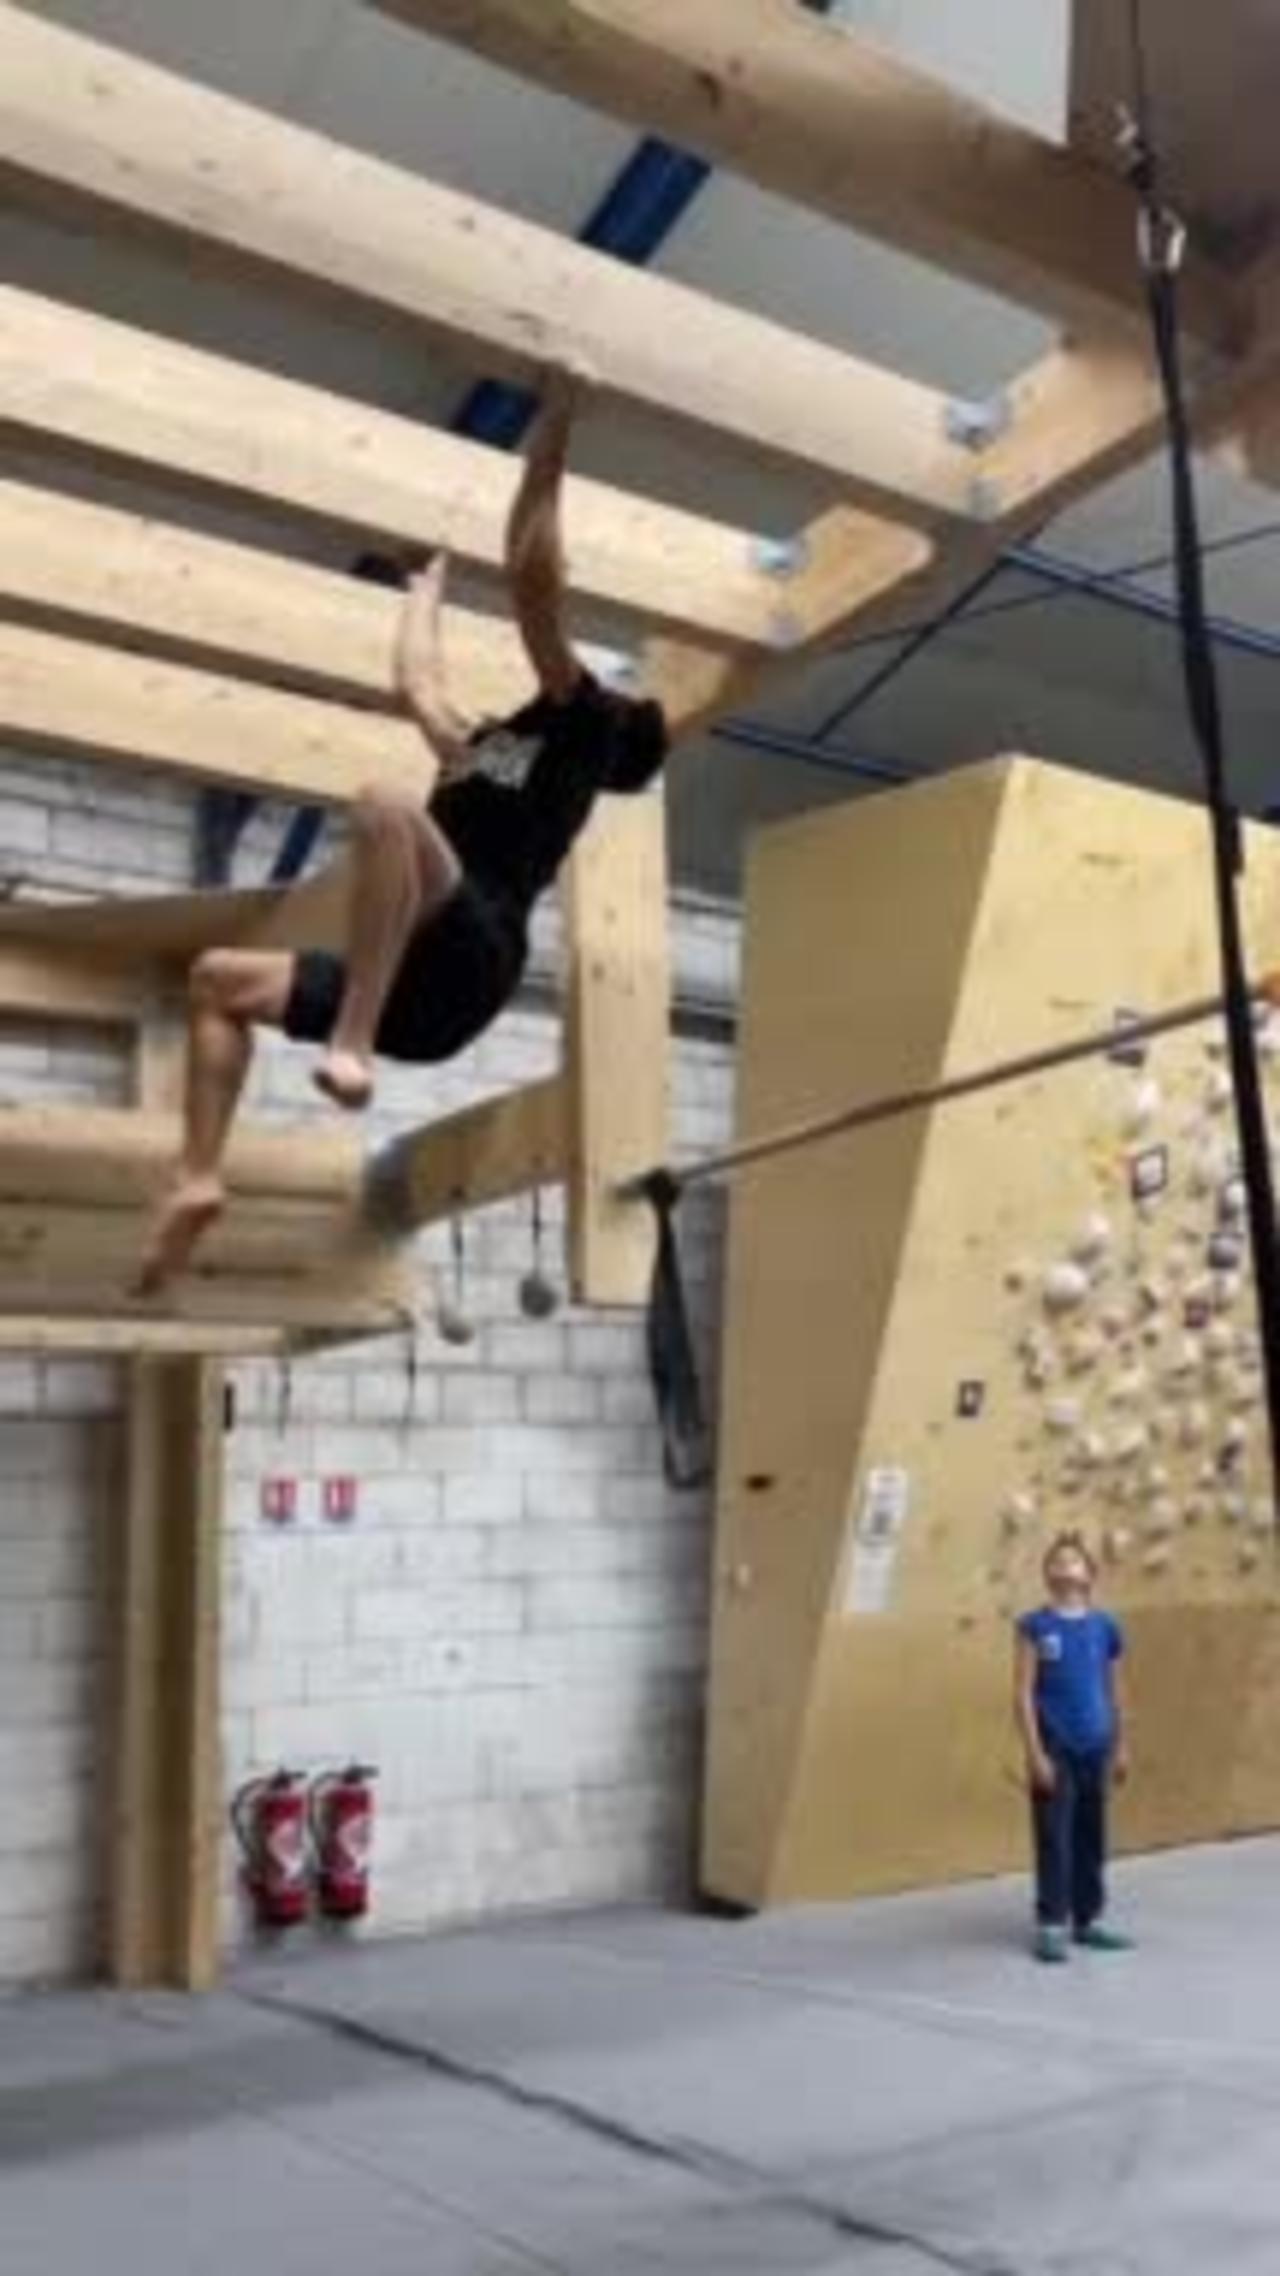 Guy Shows Strength by Gripping Wooden Ceiling Plank and Pulling His Body Towards it